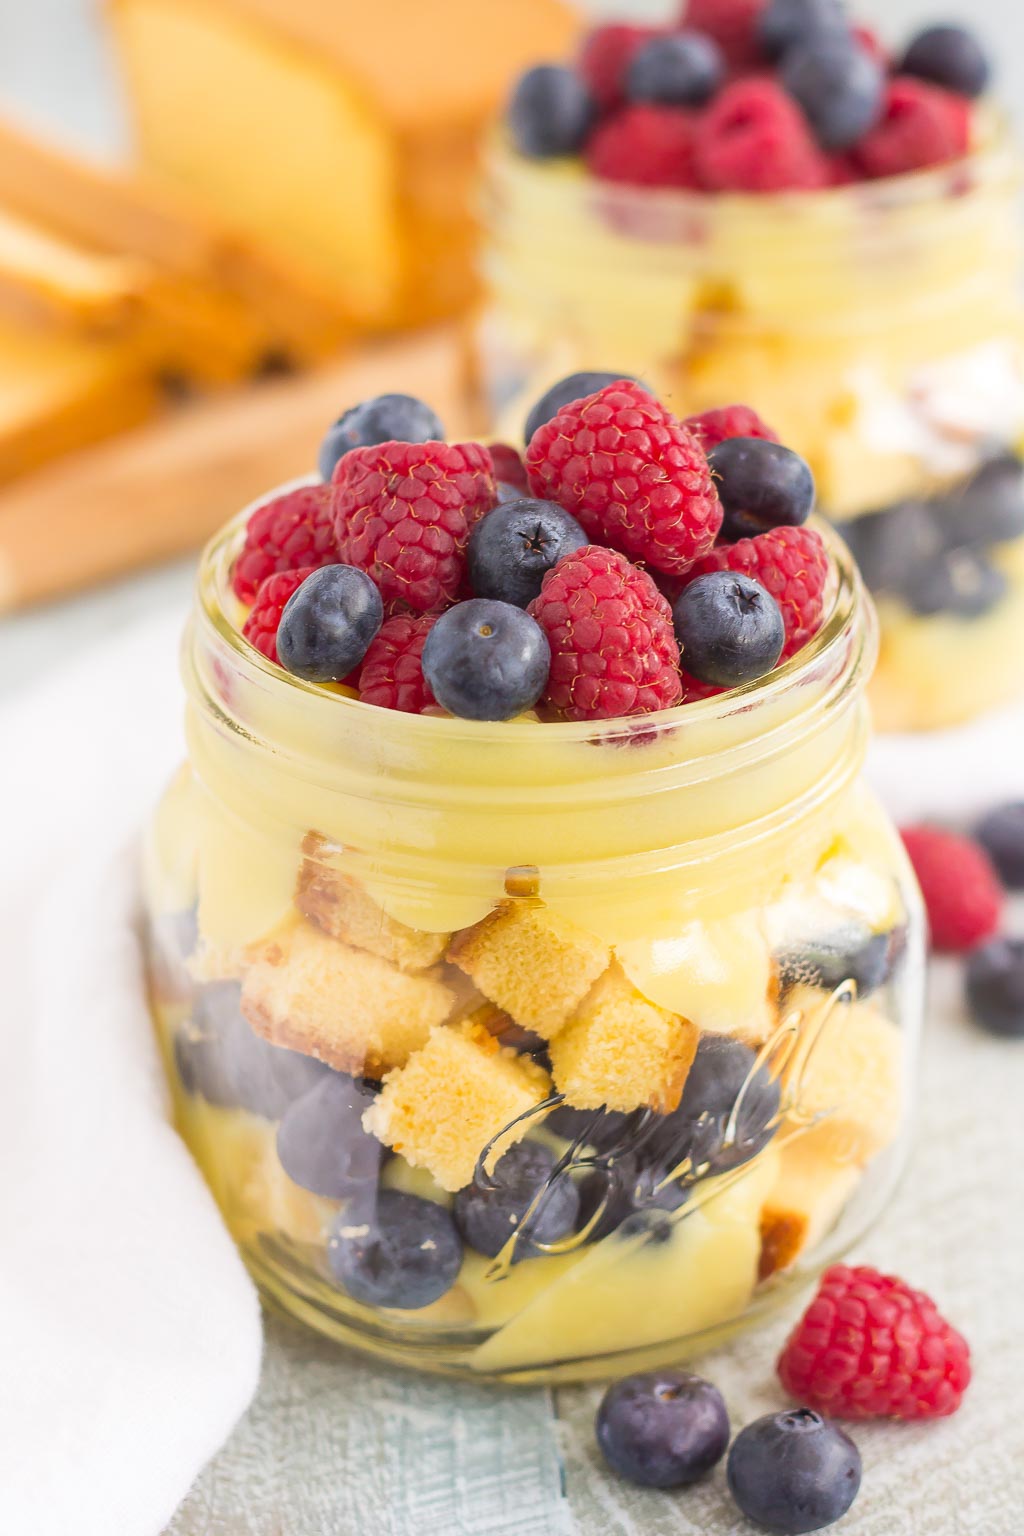 This Berry Vanilla Pudding Pound Cake Trifle is filled with creamy, whipped vanilla pudding, buttery pound cake chunks, and fresh blueberries and raspberries. It's layered together to create an easy summer treat that's ready in no time!